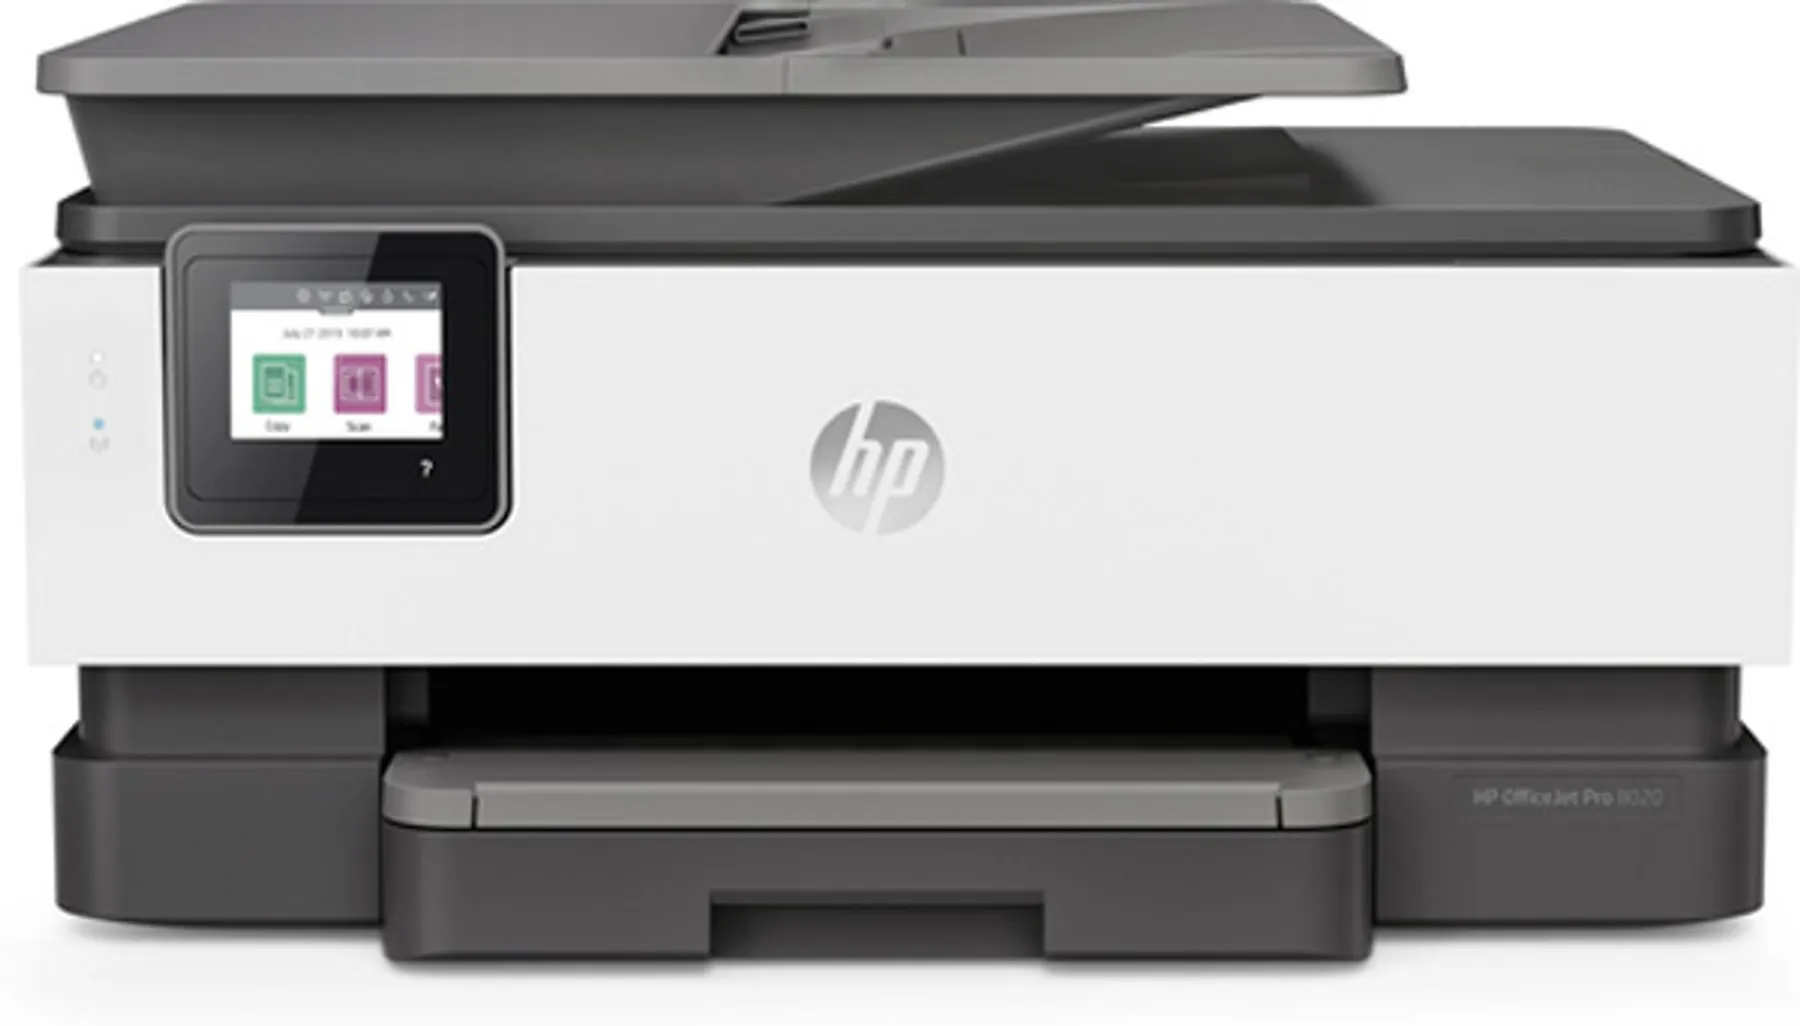 8023 all-in-one officejet pro printer